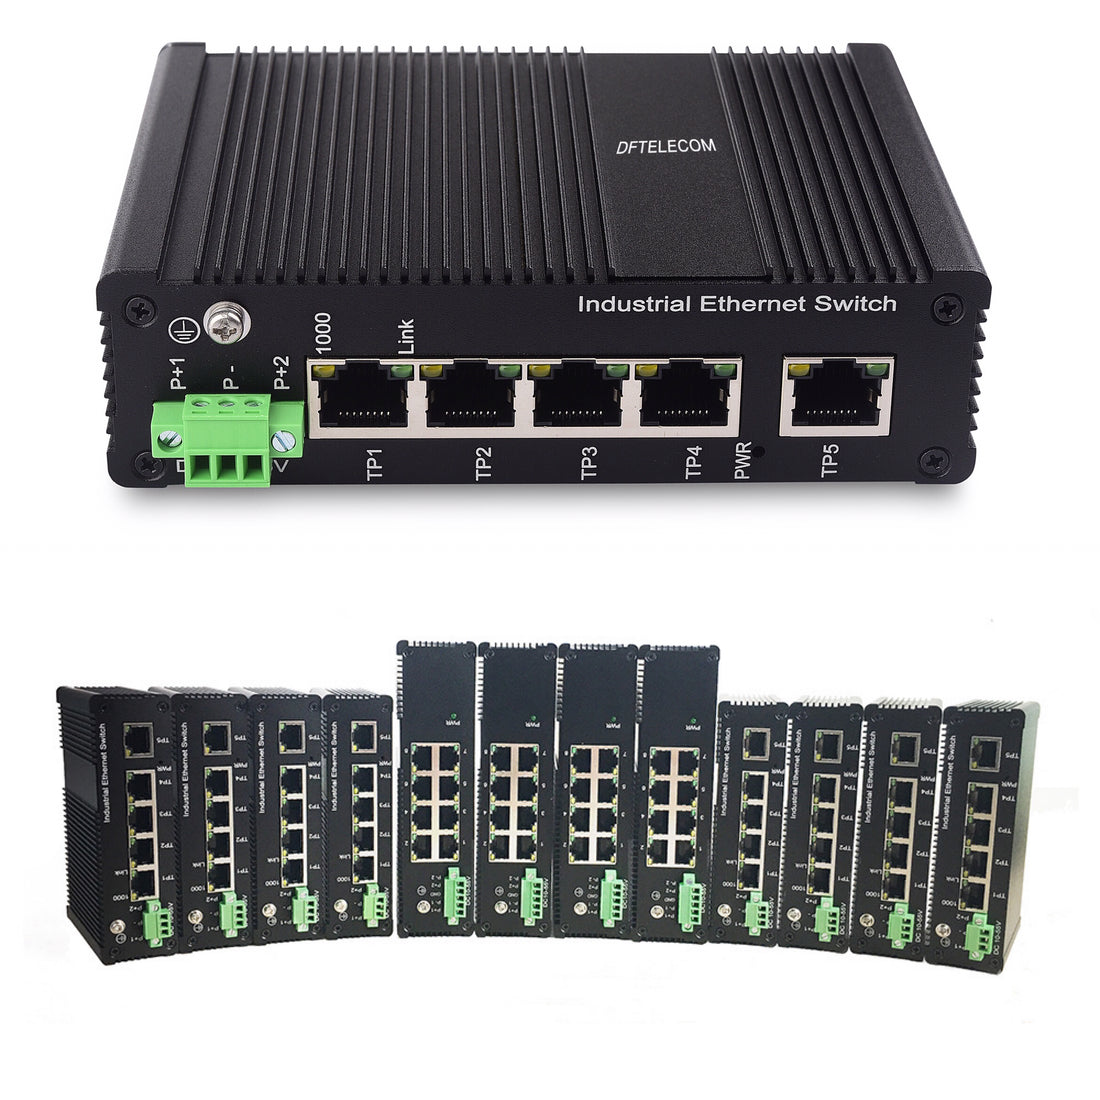 Active vs. Passive PoE Switch: Which Should We Choose?